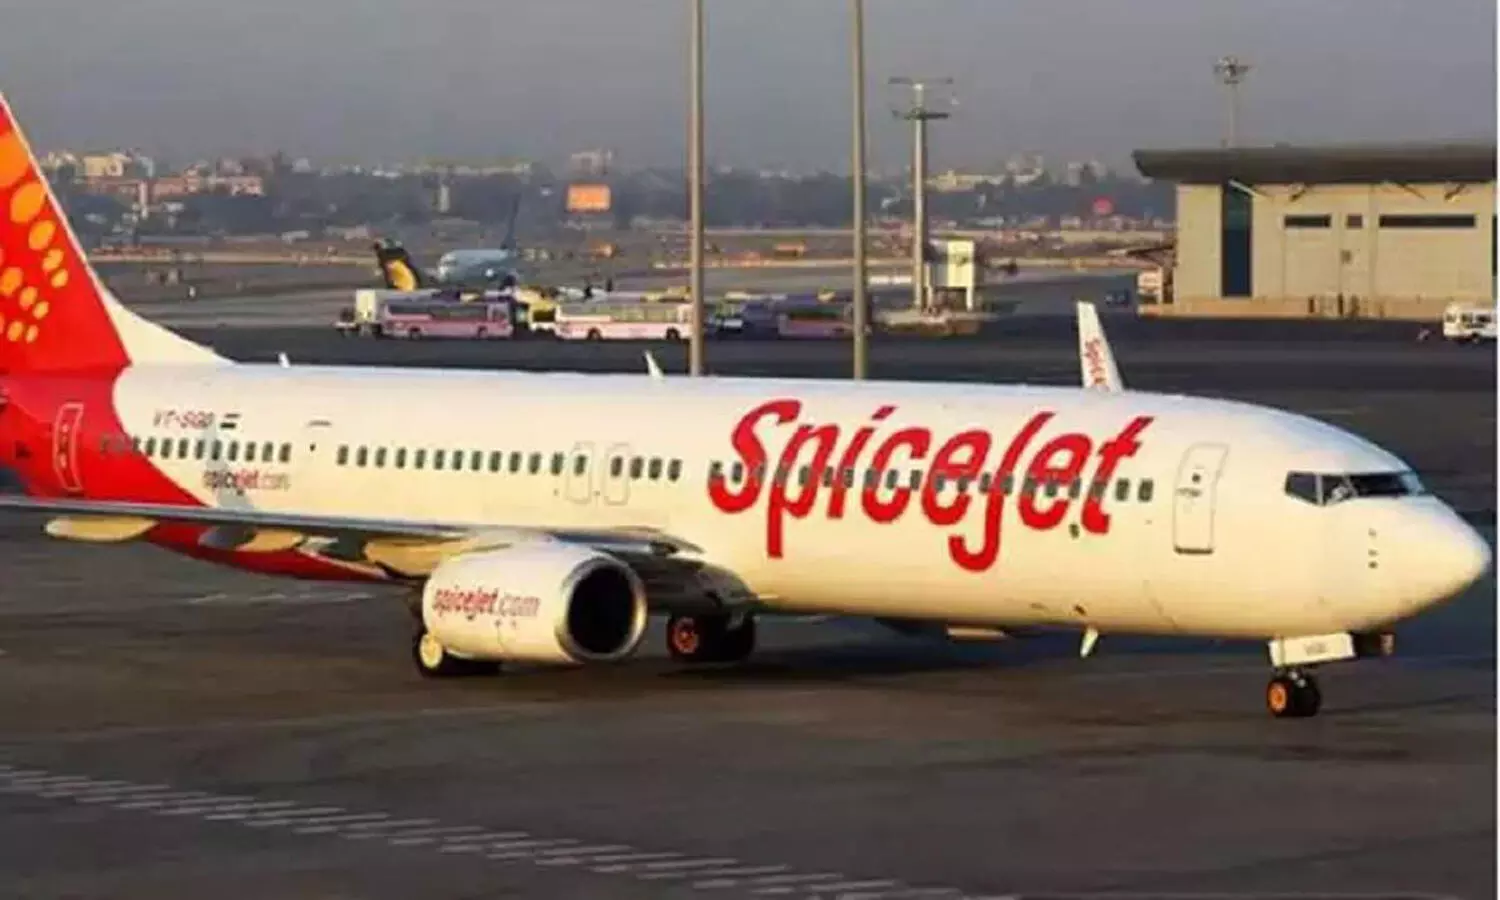 SpiceJet and More: The Race to Acquire Go First Takes an Unexpected Turn